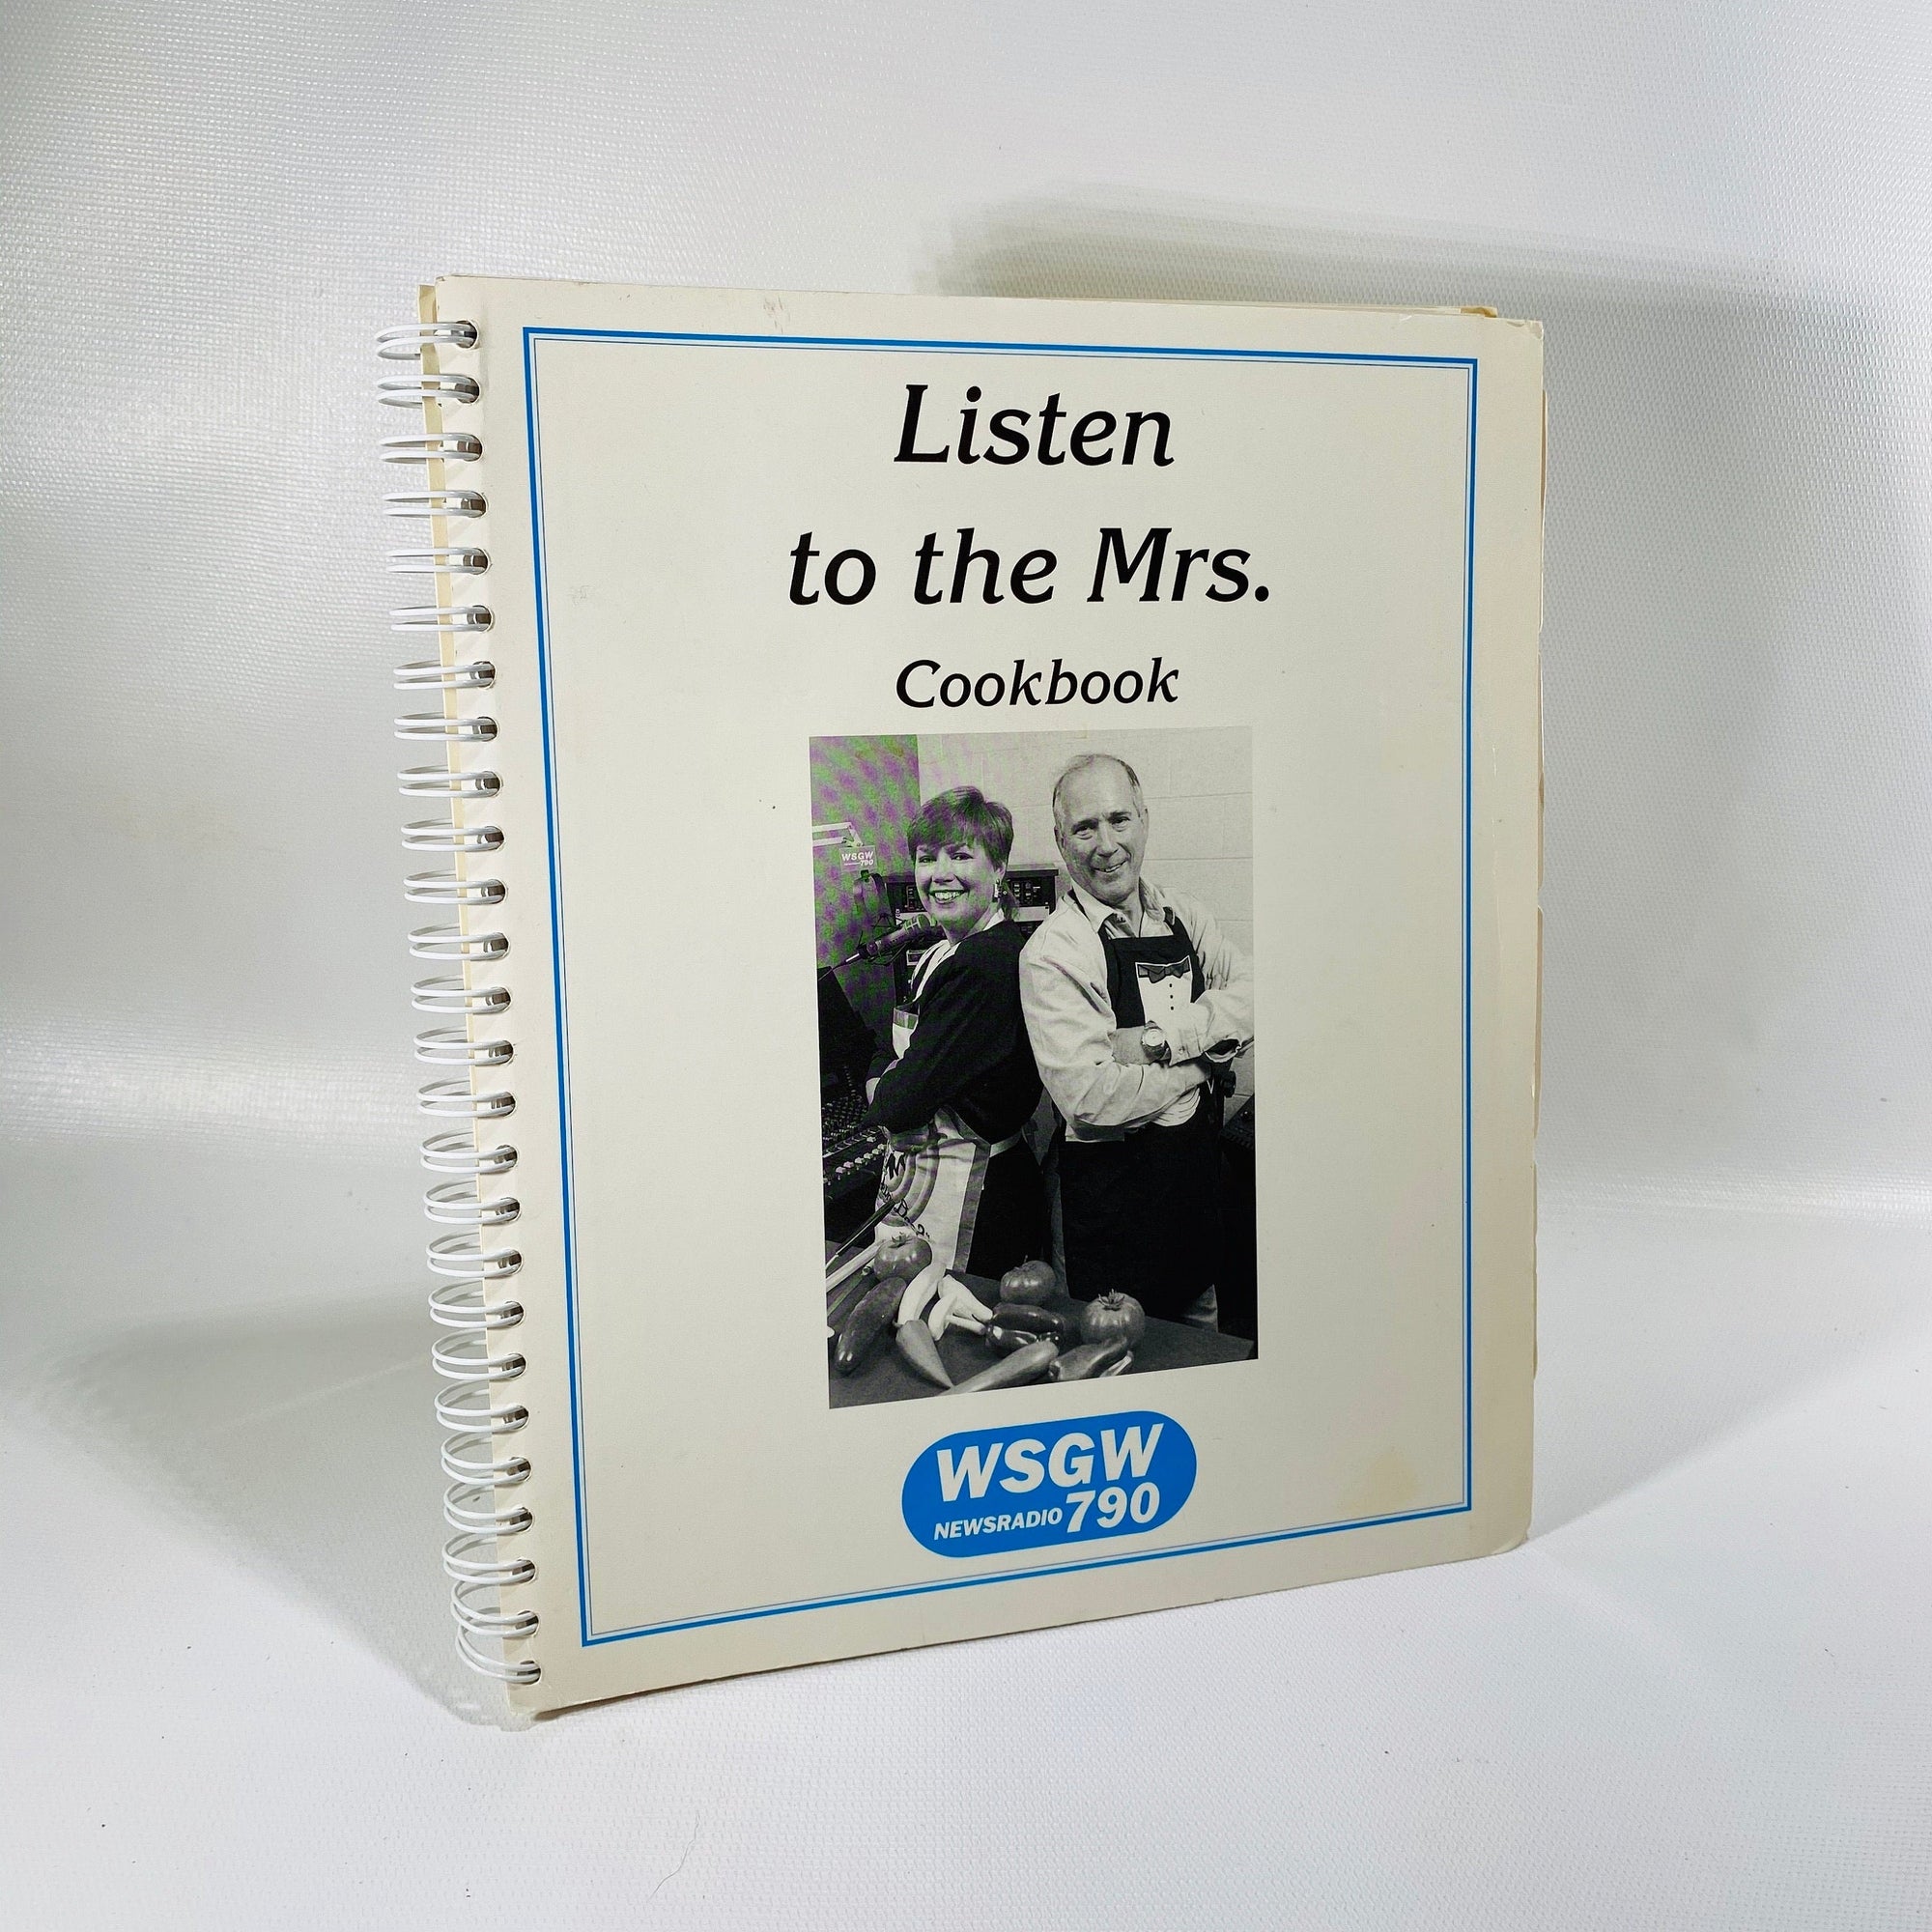 Listen to the Mrs. Cookbook April 1996 Signed by the hosts of Listen to the Mrs. WSGW 790 Call in Radio Show  Vintage Cookbook